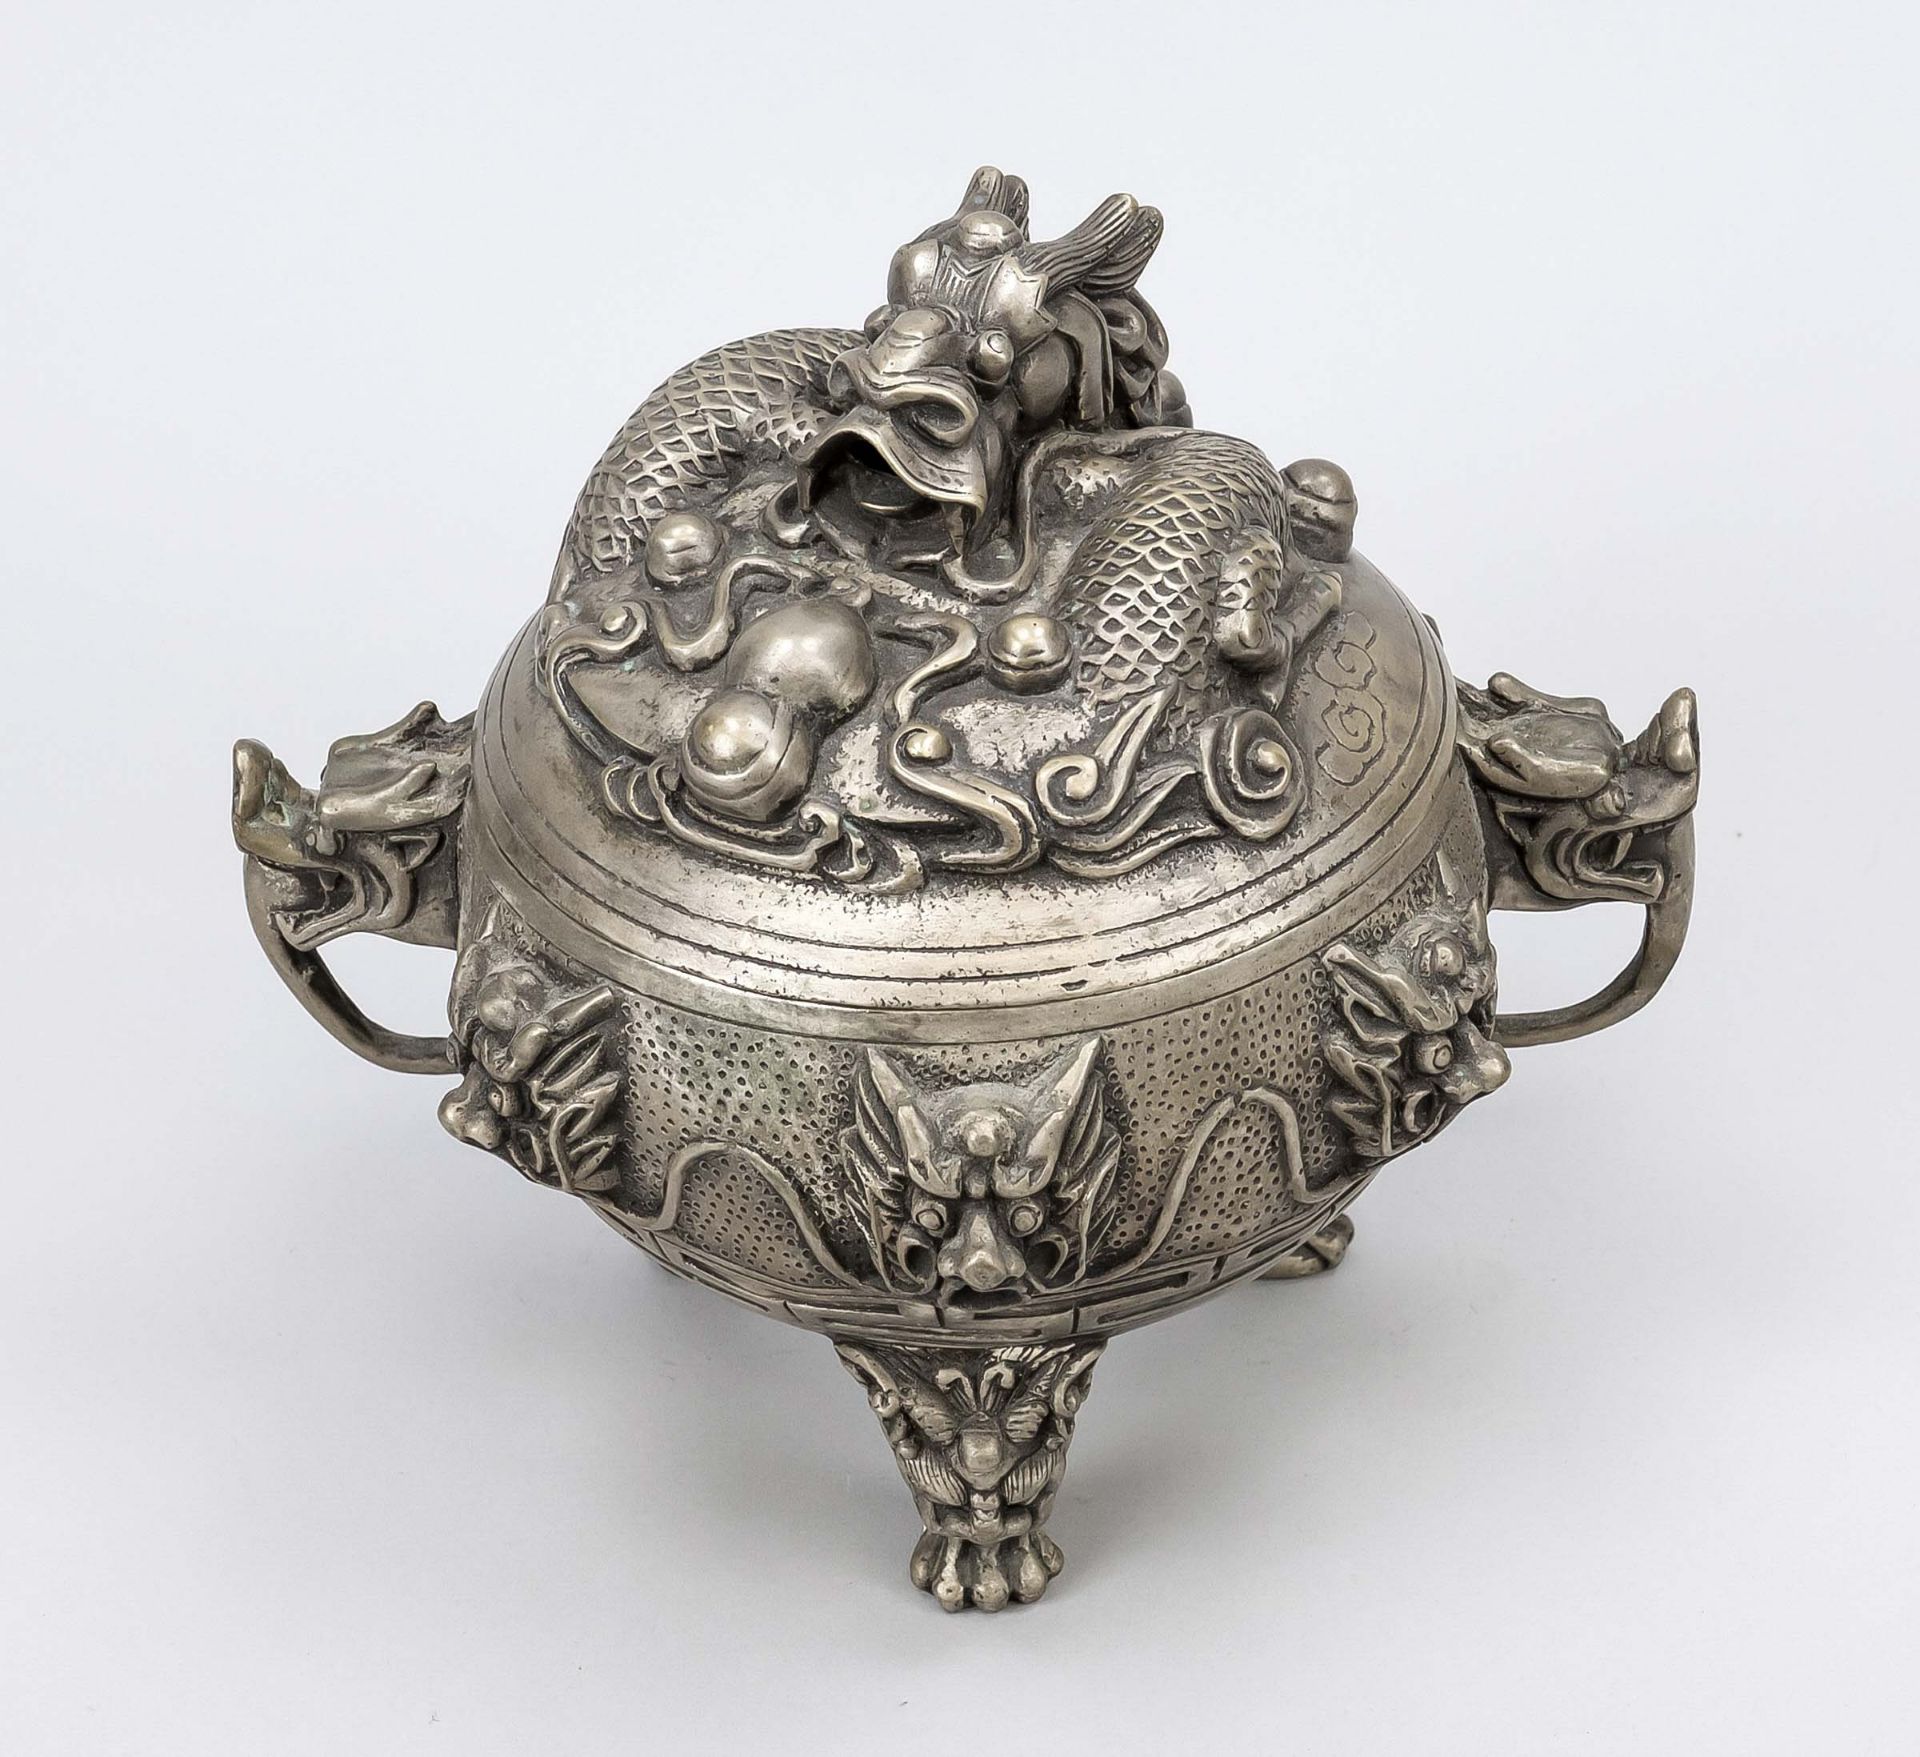 Large tripod censer, China 19th/20th century, metal. Bellied body on 3 legs, decorated in relief